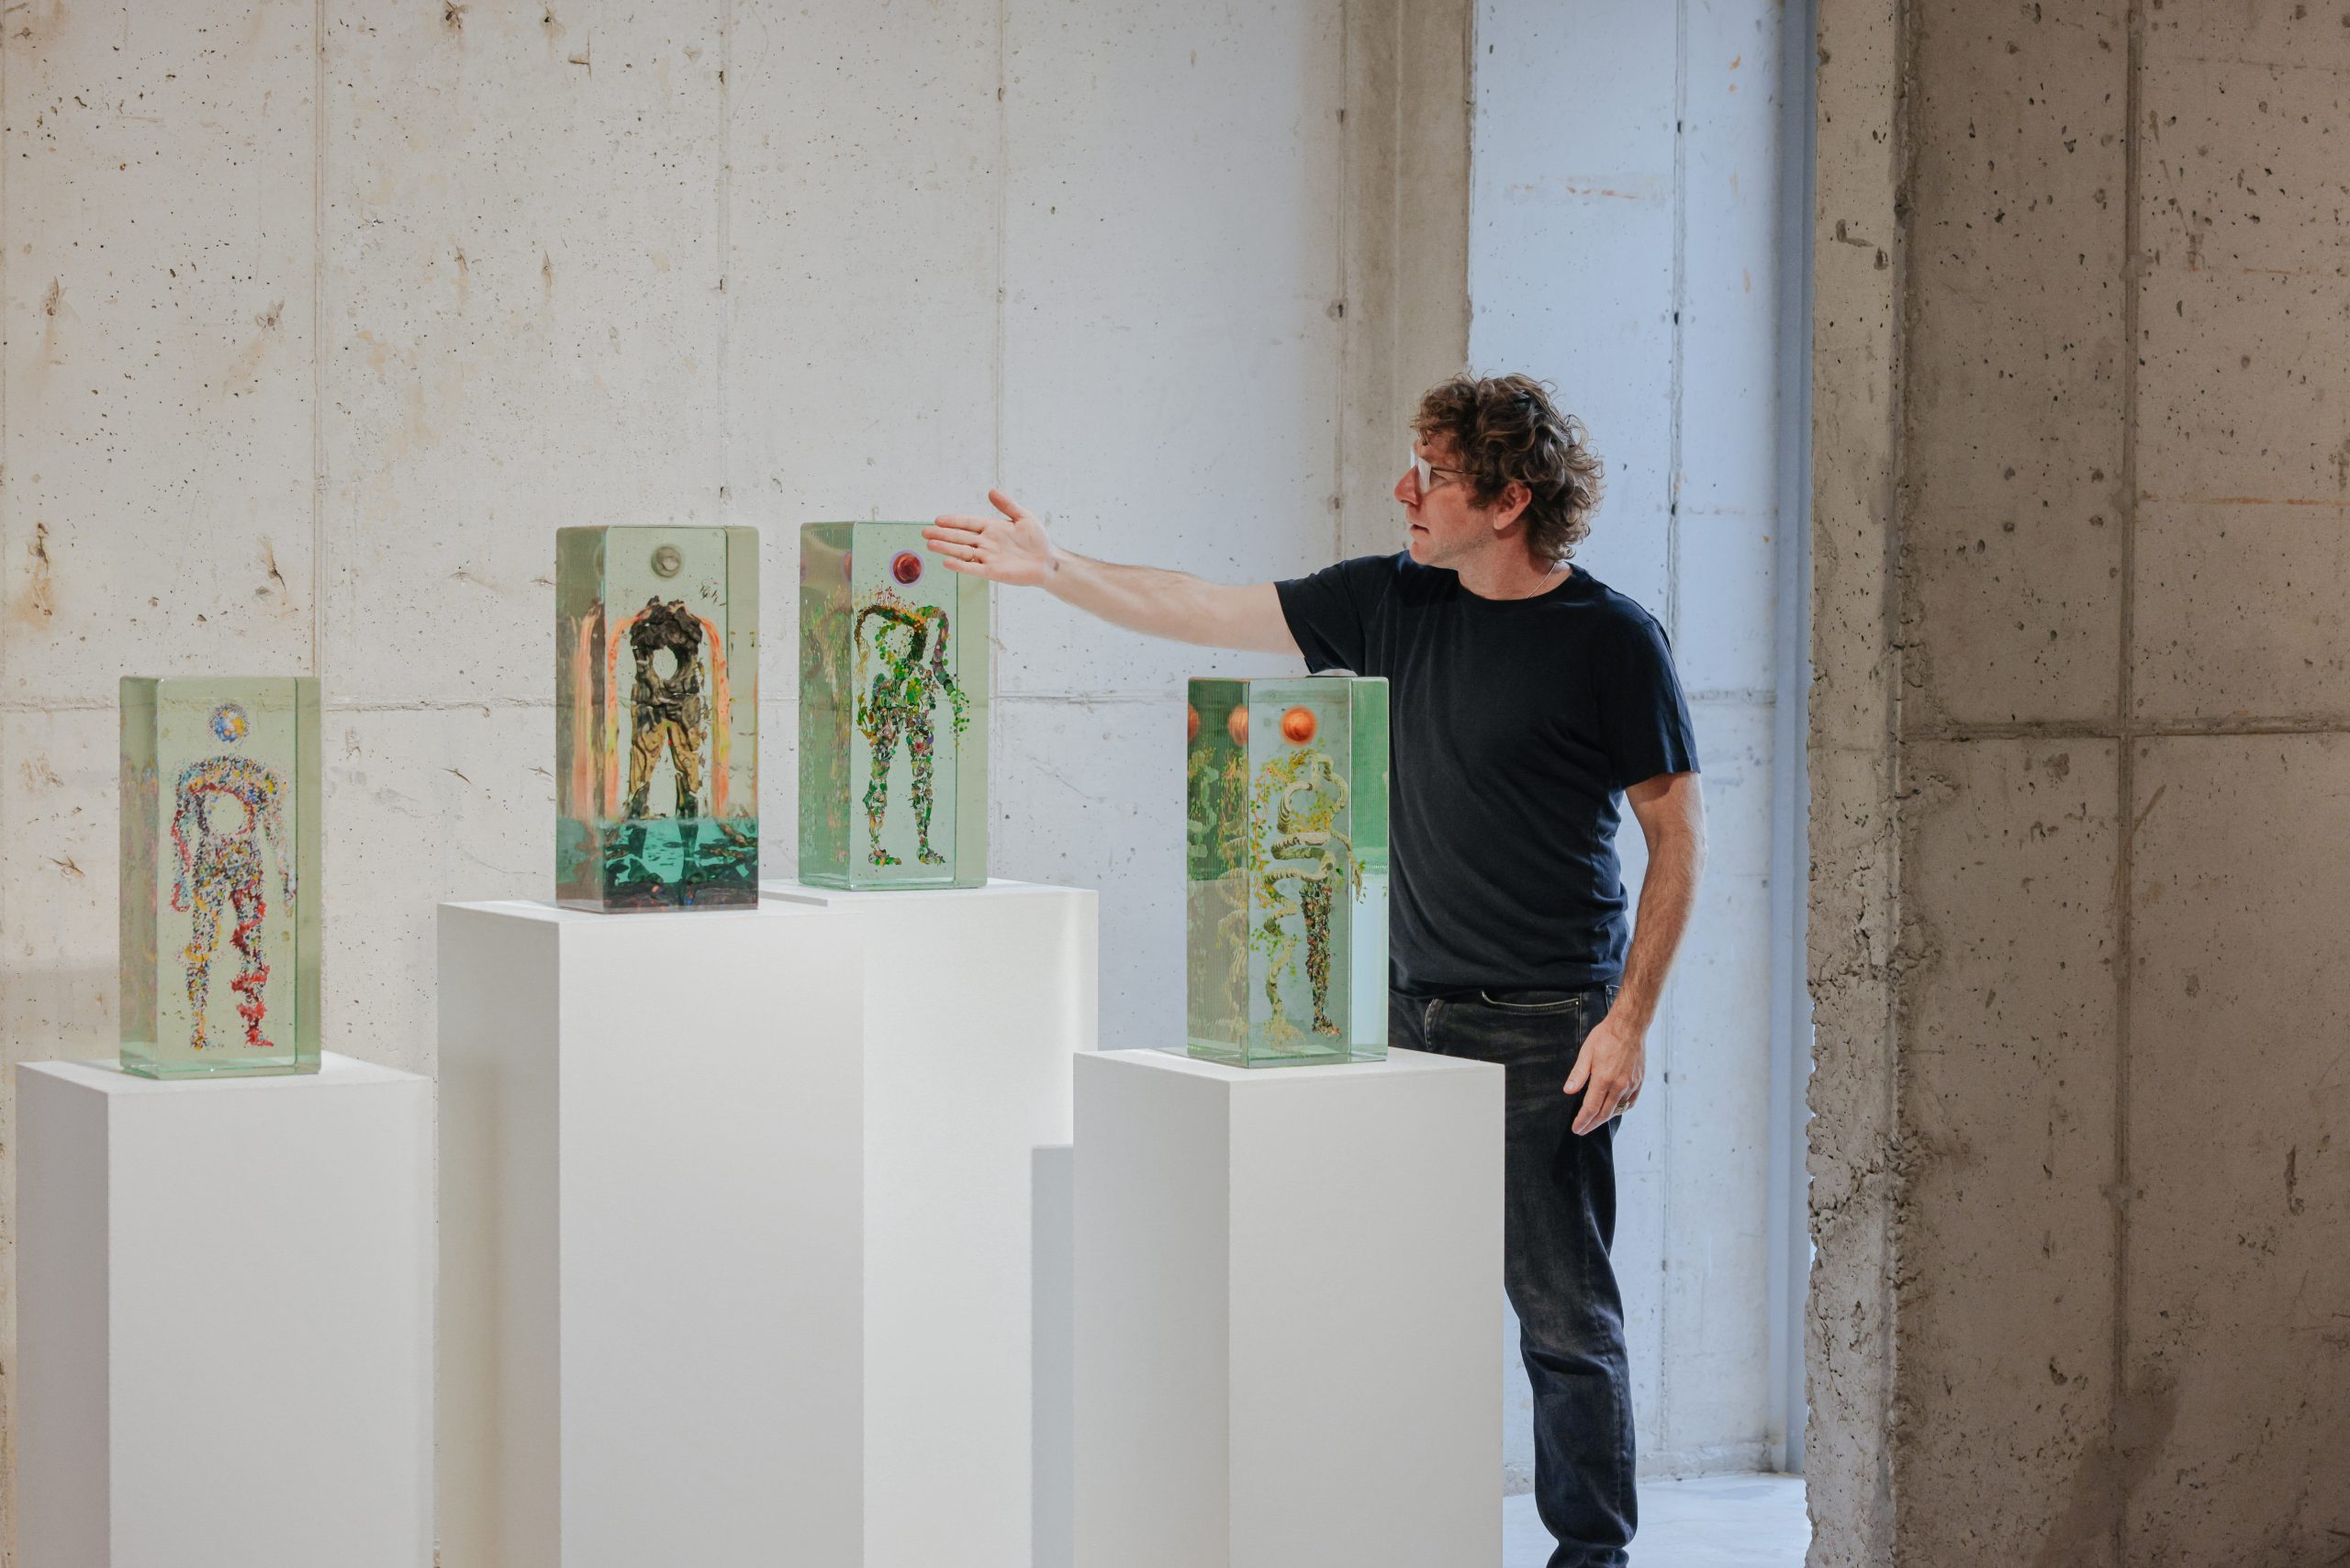 Artivist: Fostering Artistic Evolution and Exploration in Seoul with Dustin Yellin